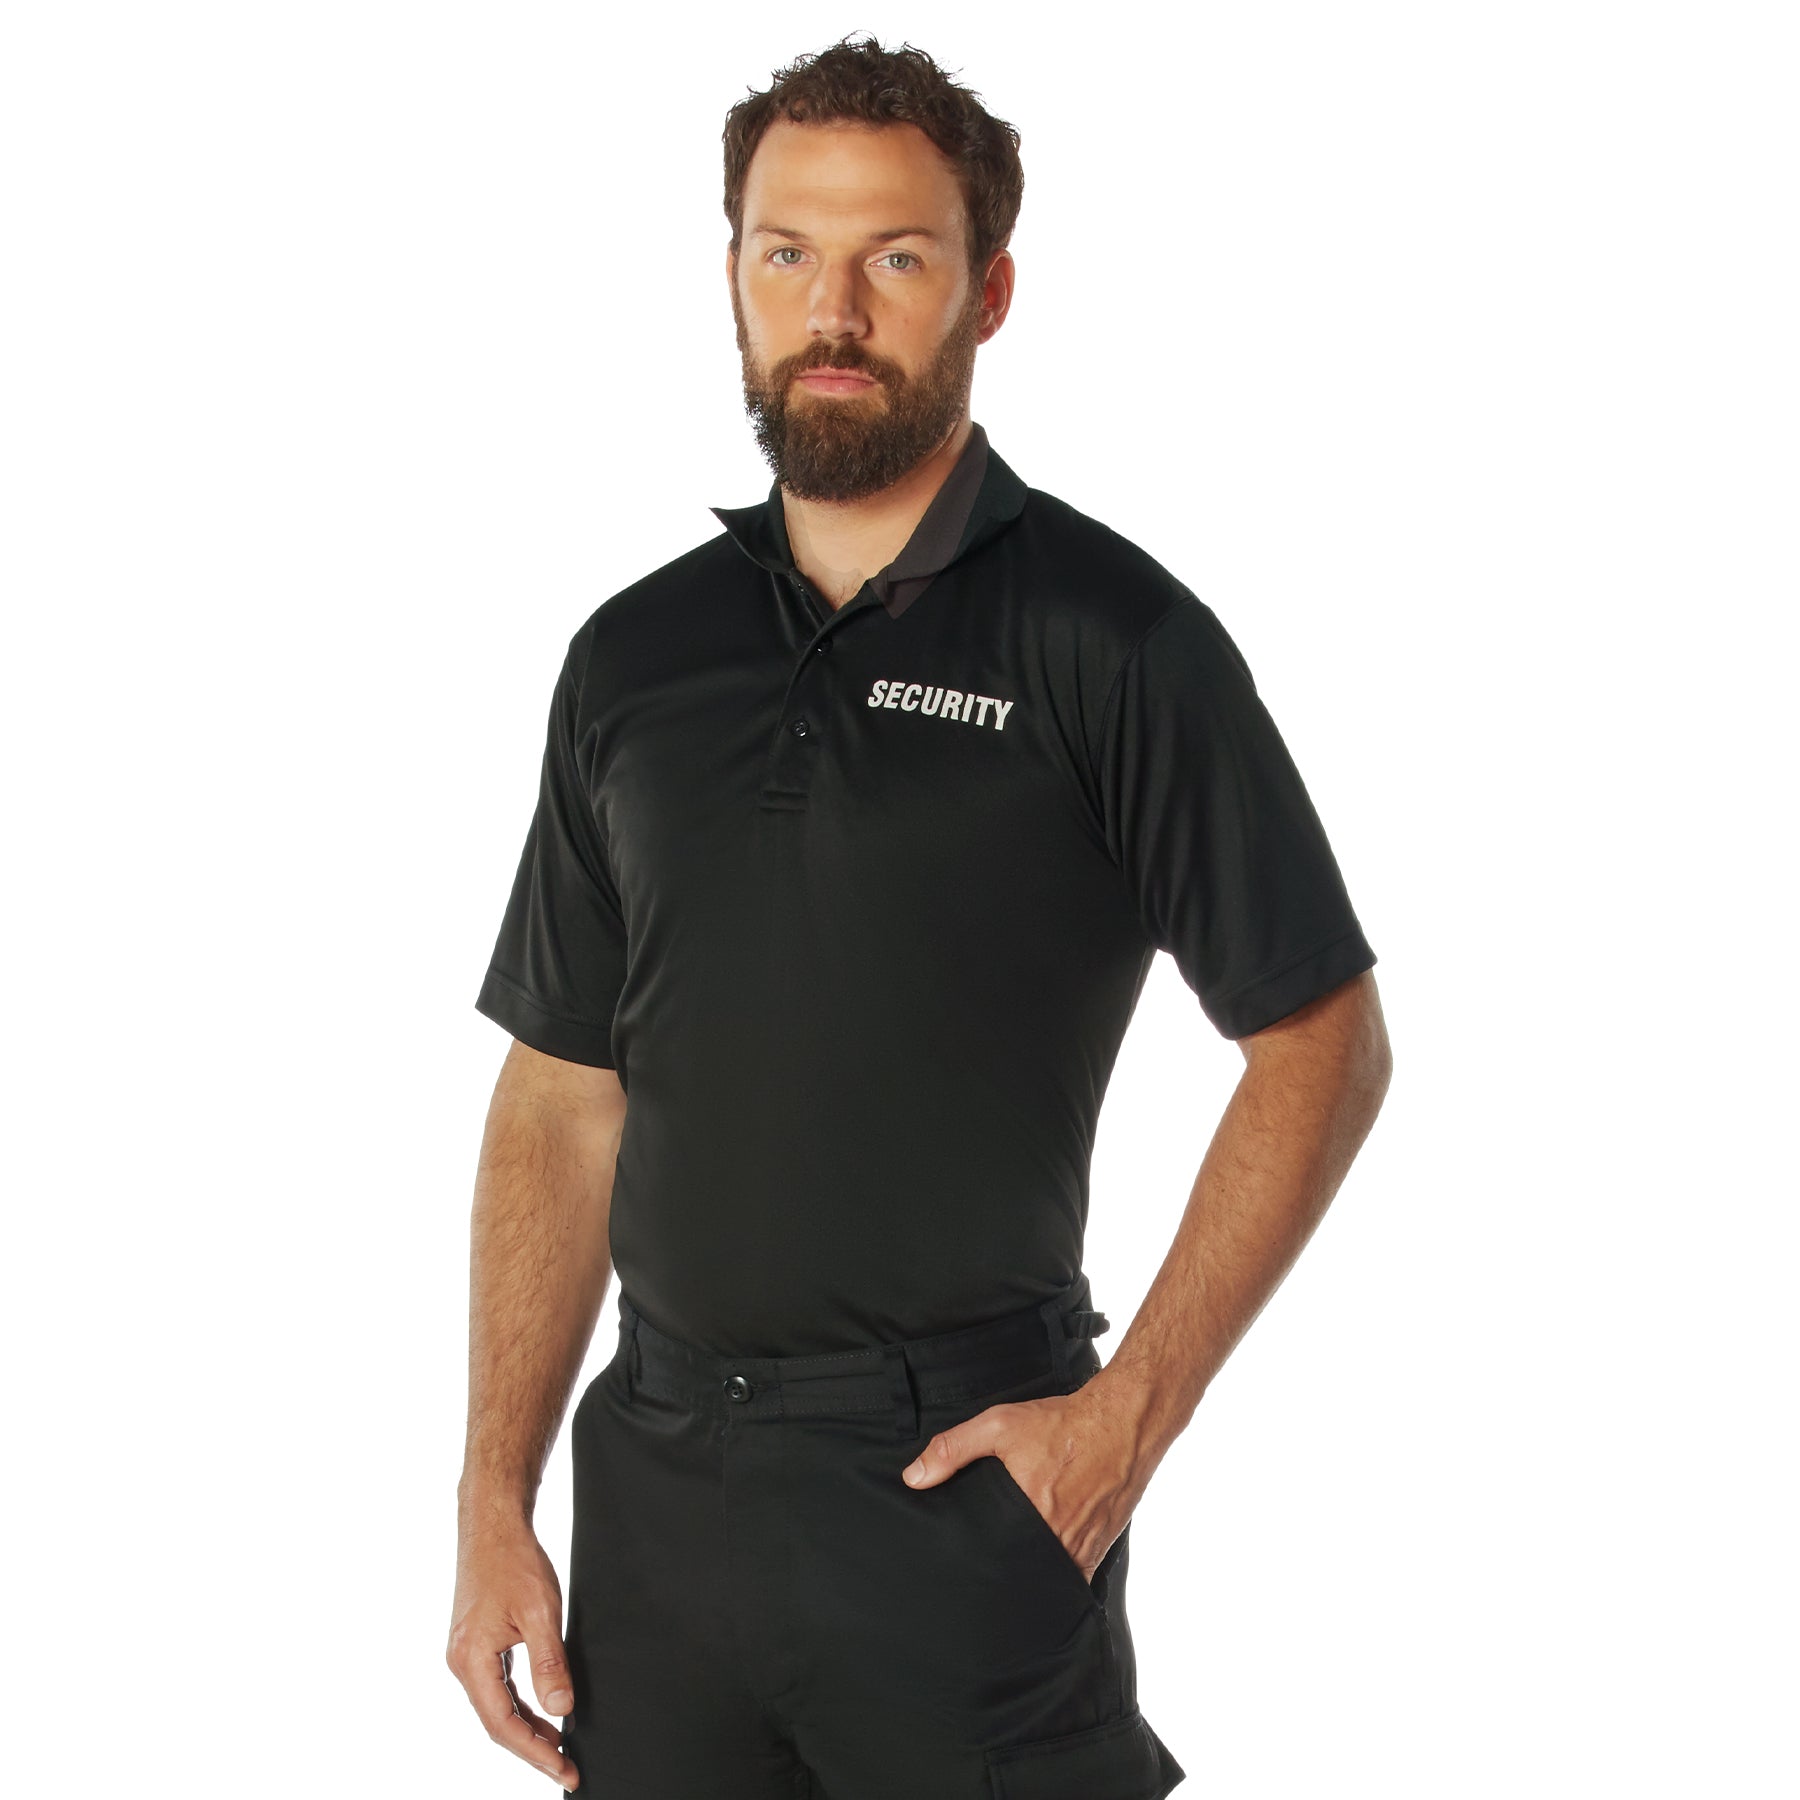 [Public Safety] Poly Moisture Wicking Security Polo T-Shirts Security White - Black